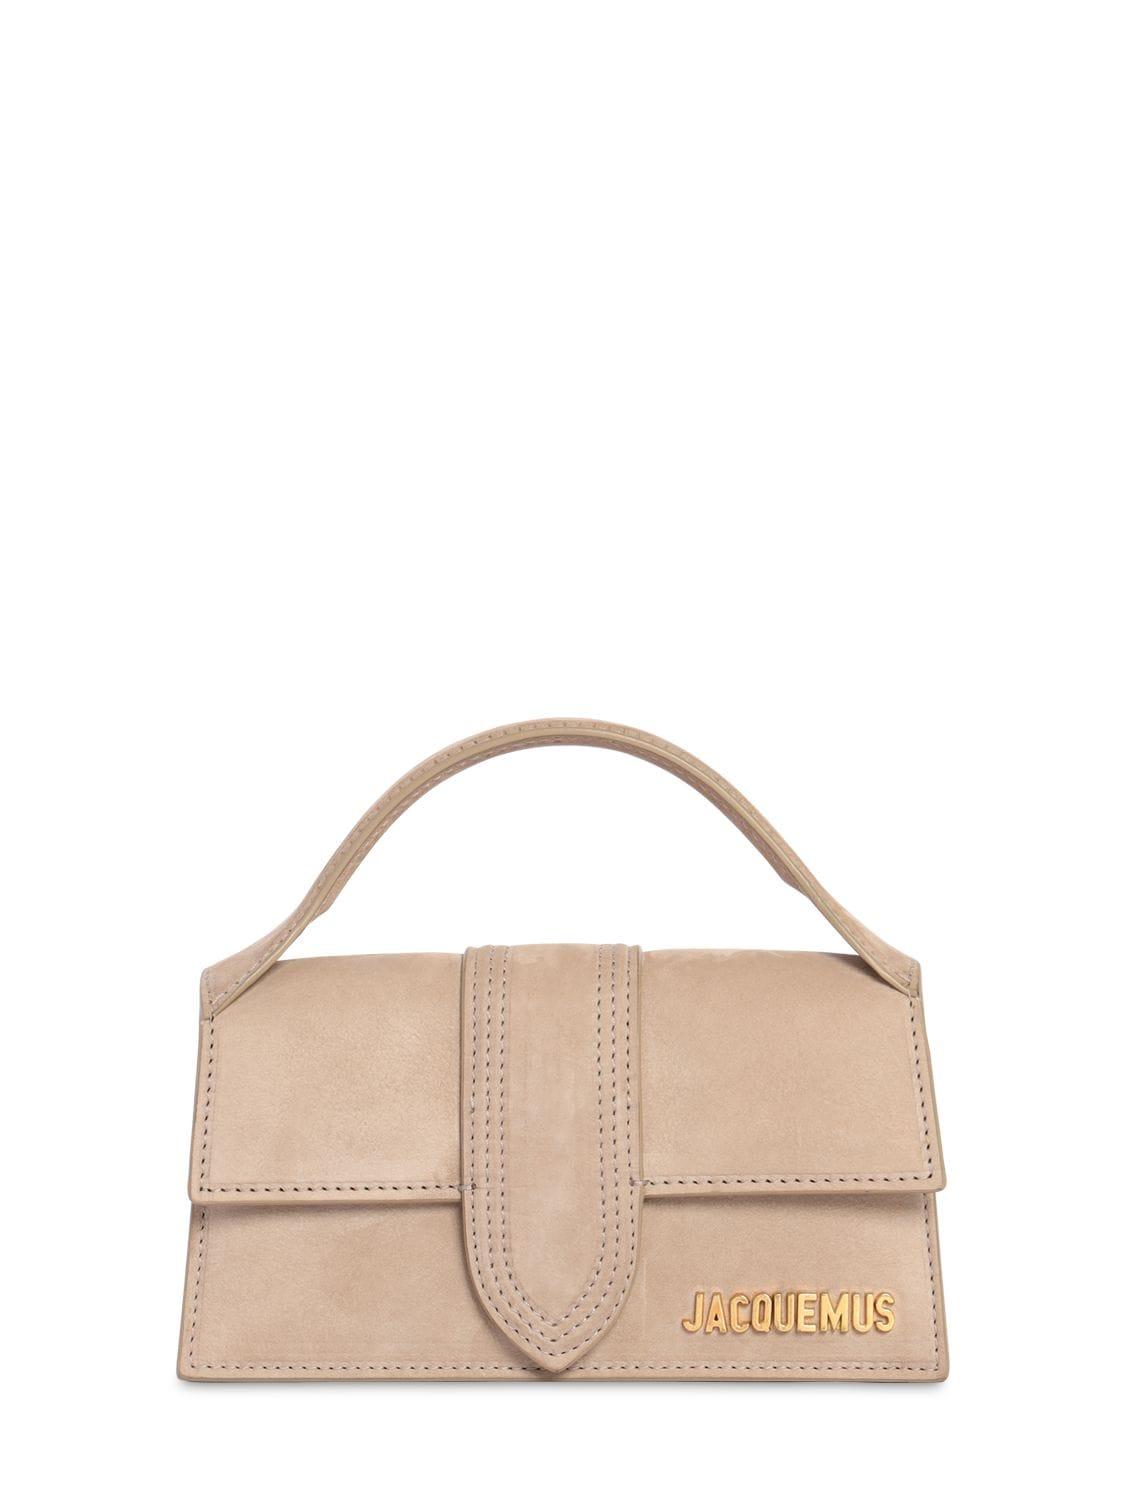 Jacquemus Le Bambino Suede Bag in Natural | Lyst